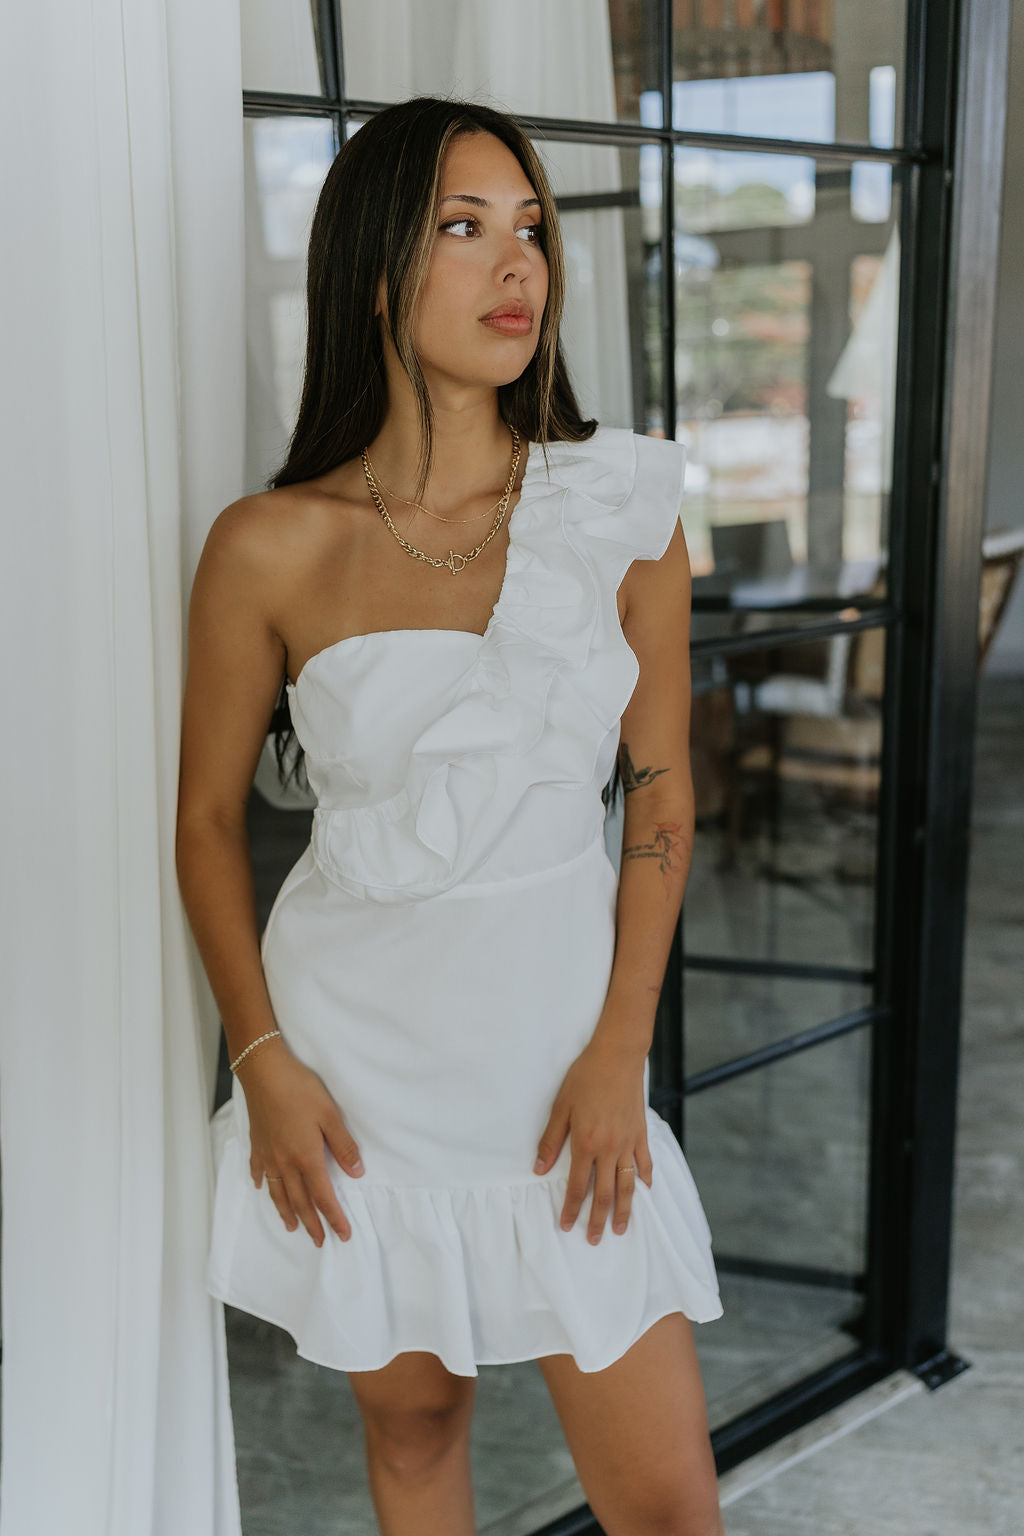 Front view of model wearing the Elyse White Ruffled One Shoulder Dress that has white fabric, one shoulder straps with ruffles, and a ruffled mini length hem.